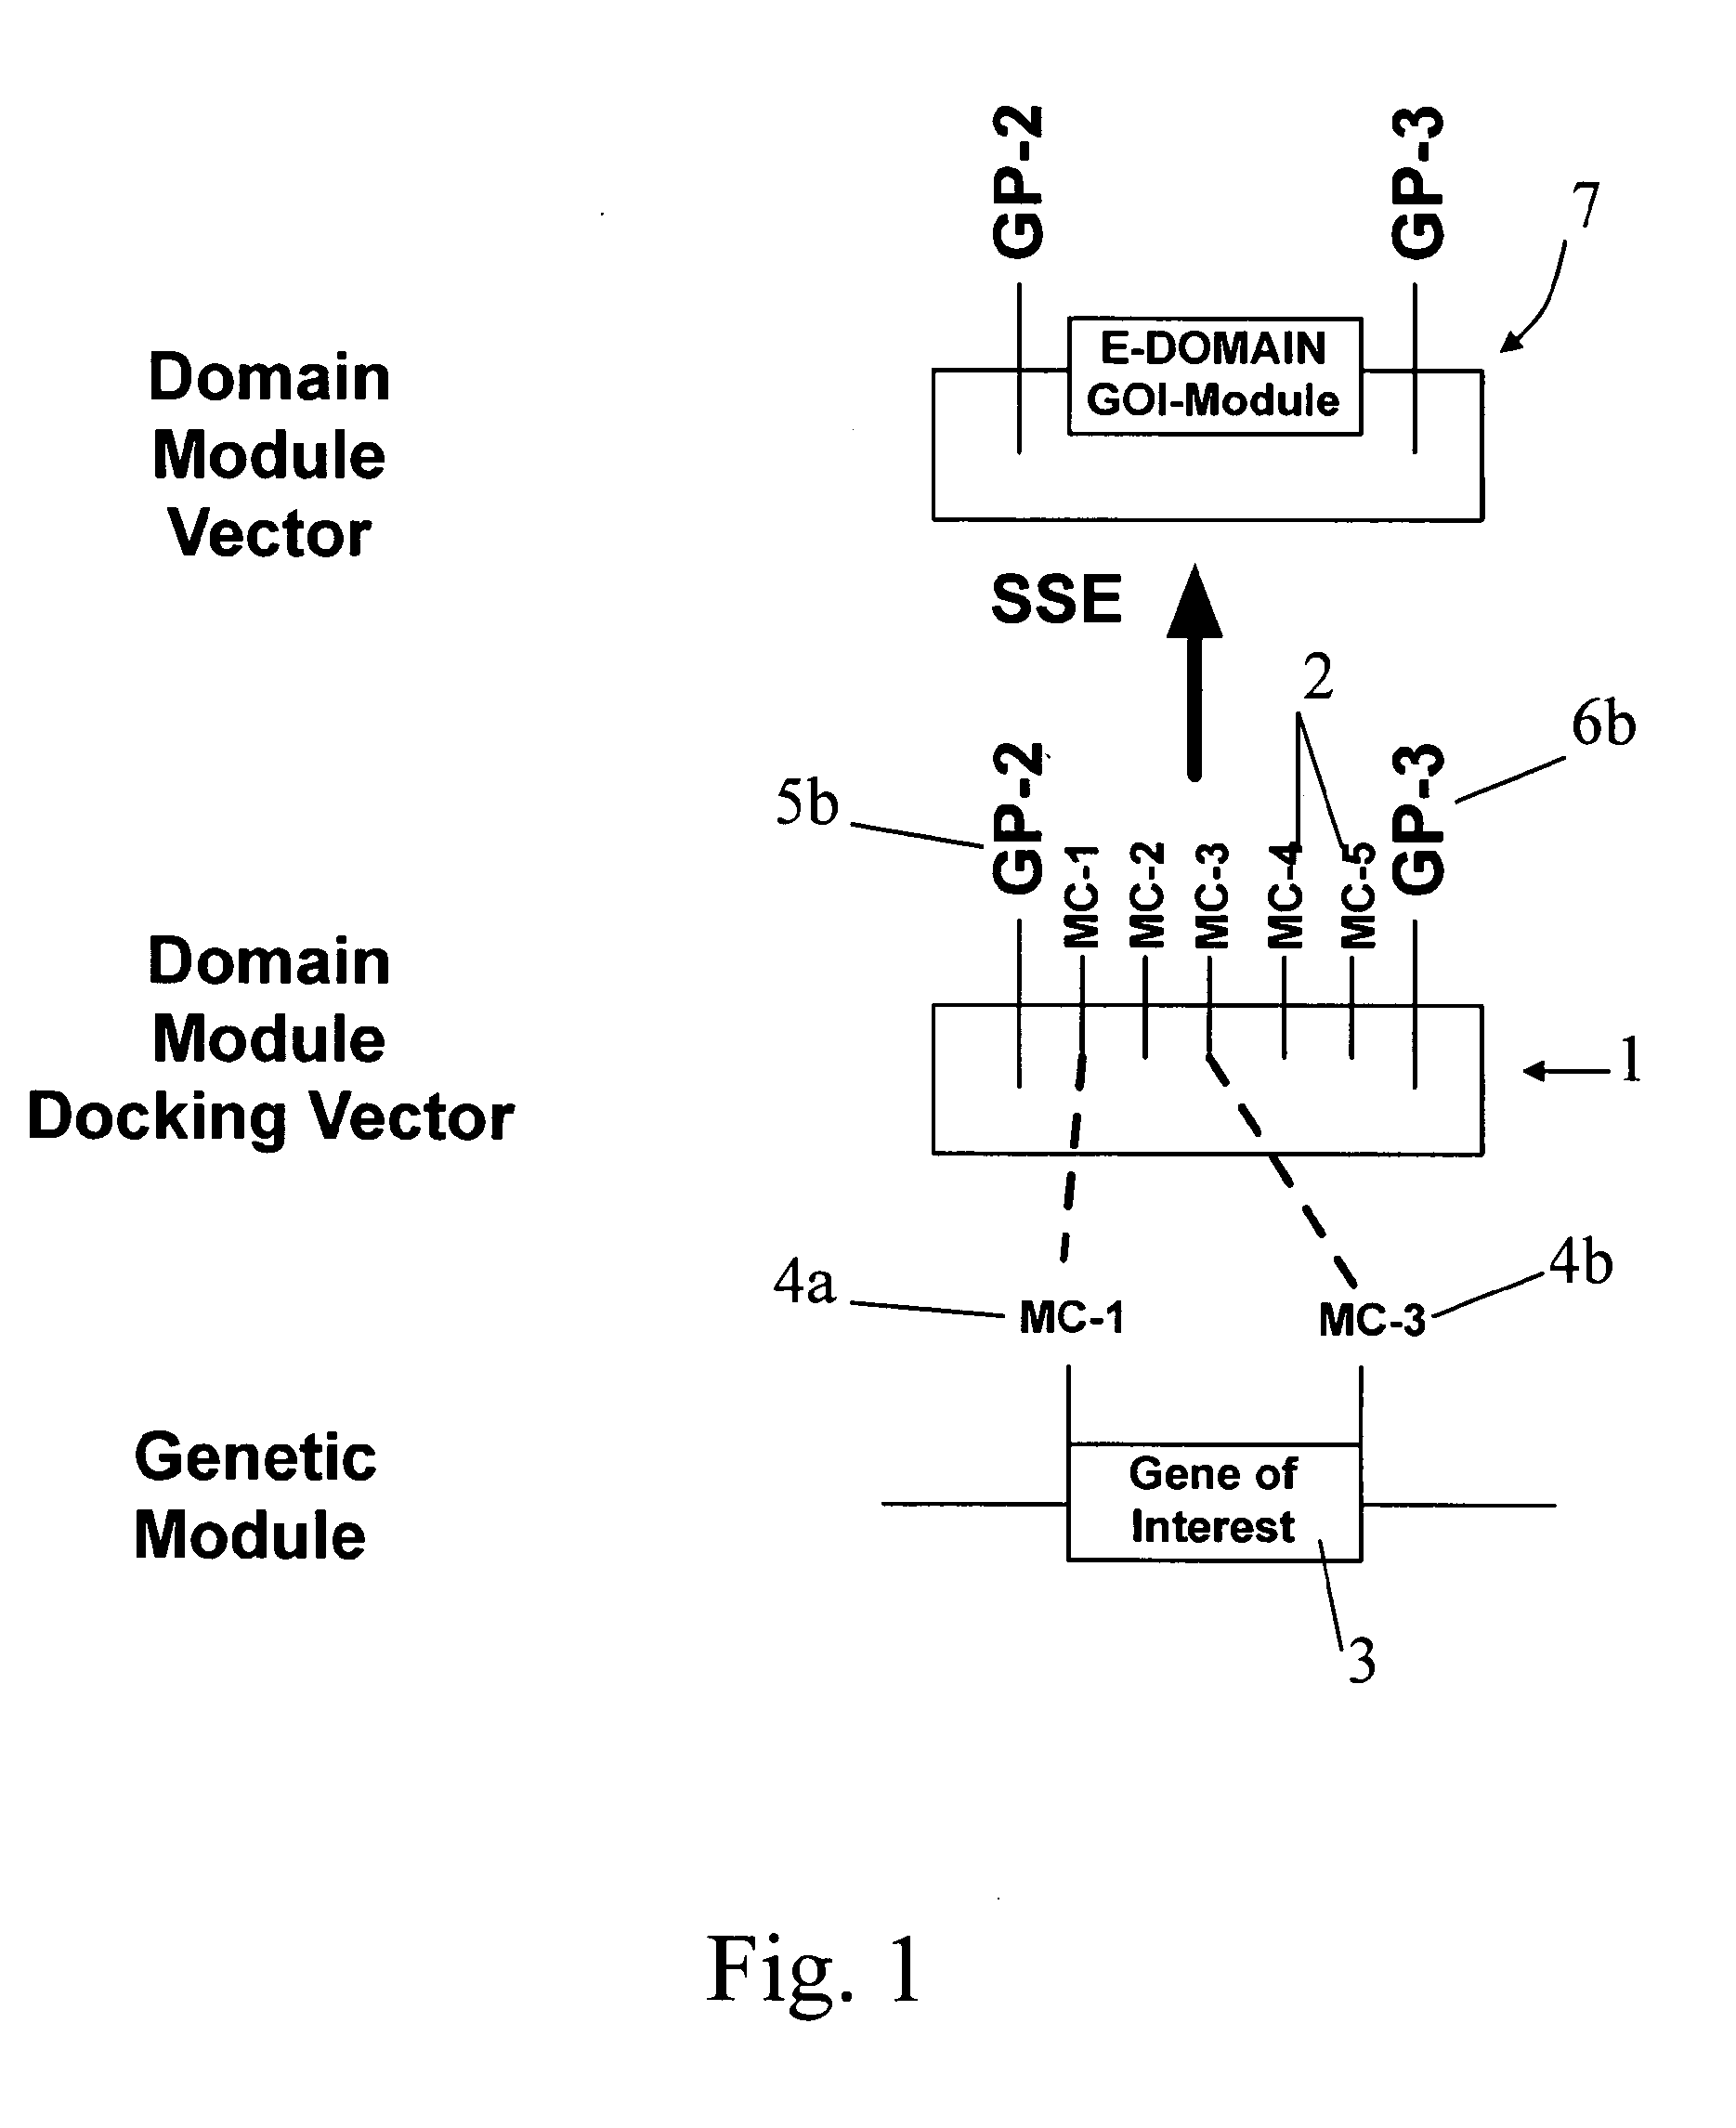 DNA modular cloning vector plasmids and methods for their use